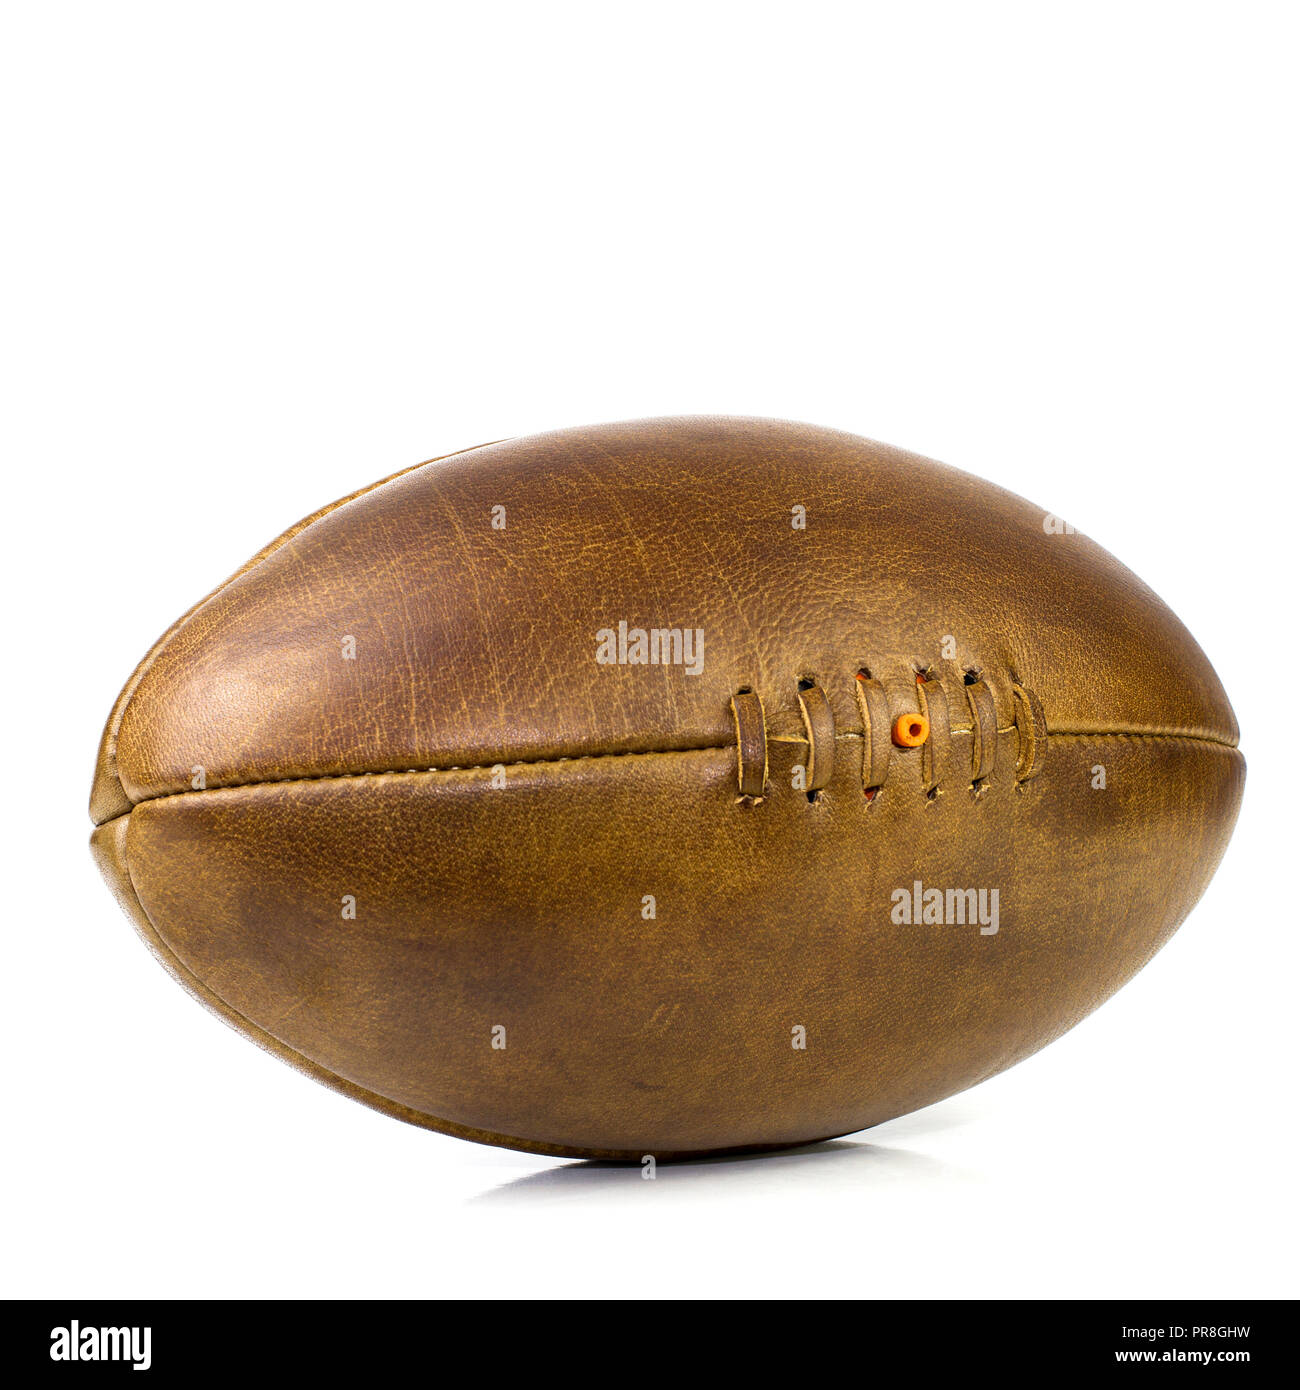 vintage lace up leather rugby ball Stock Photo